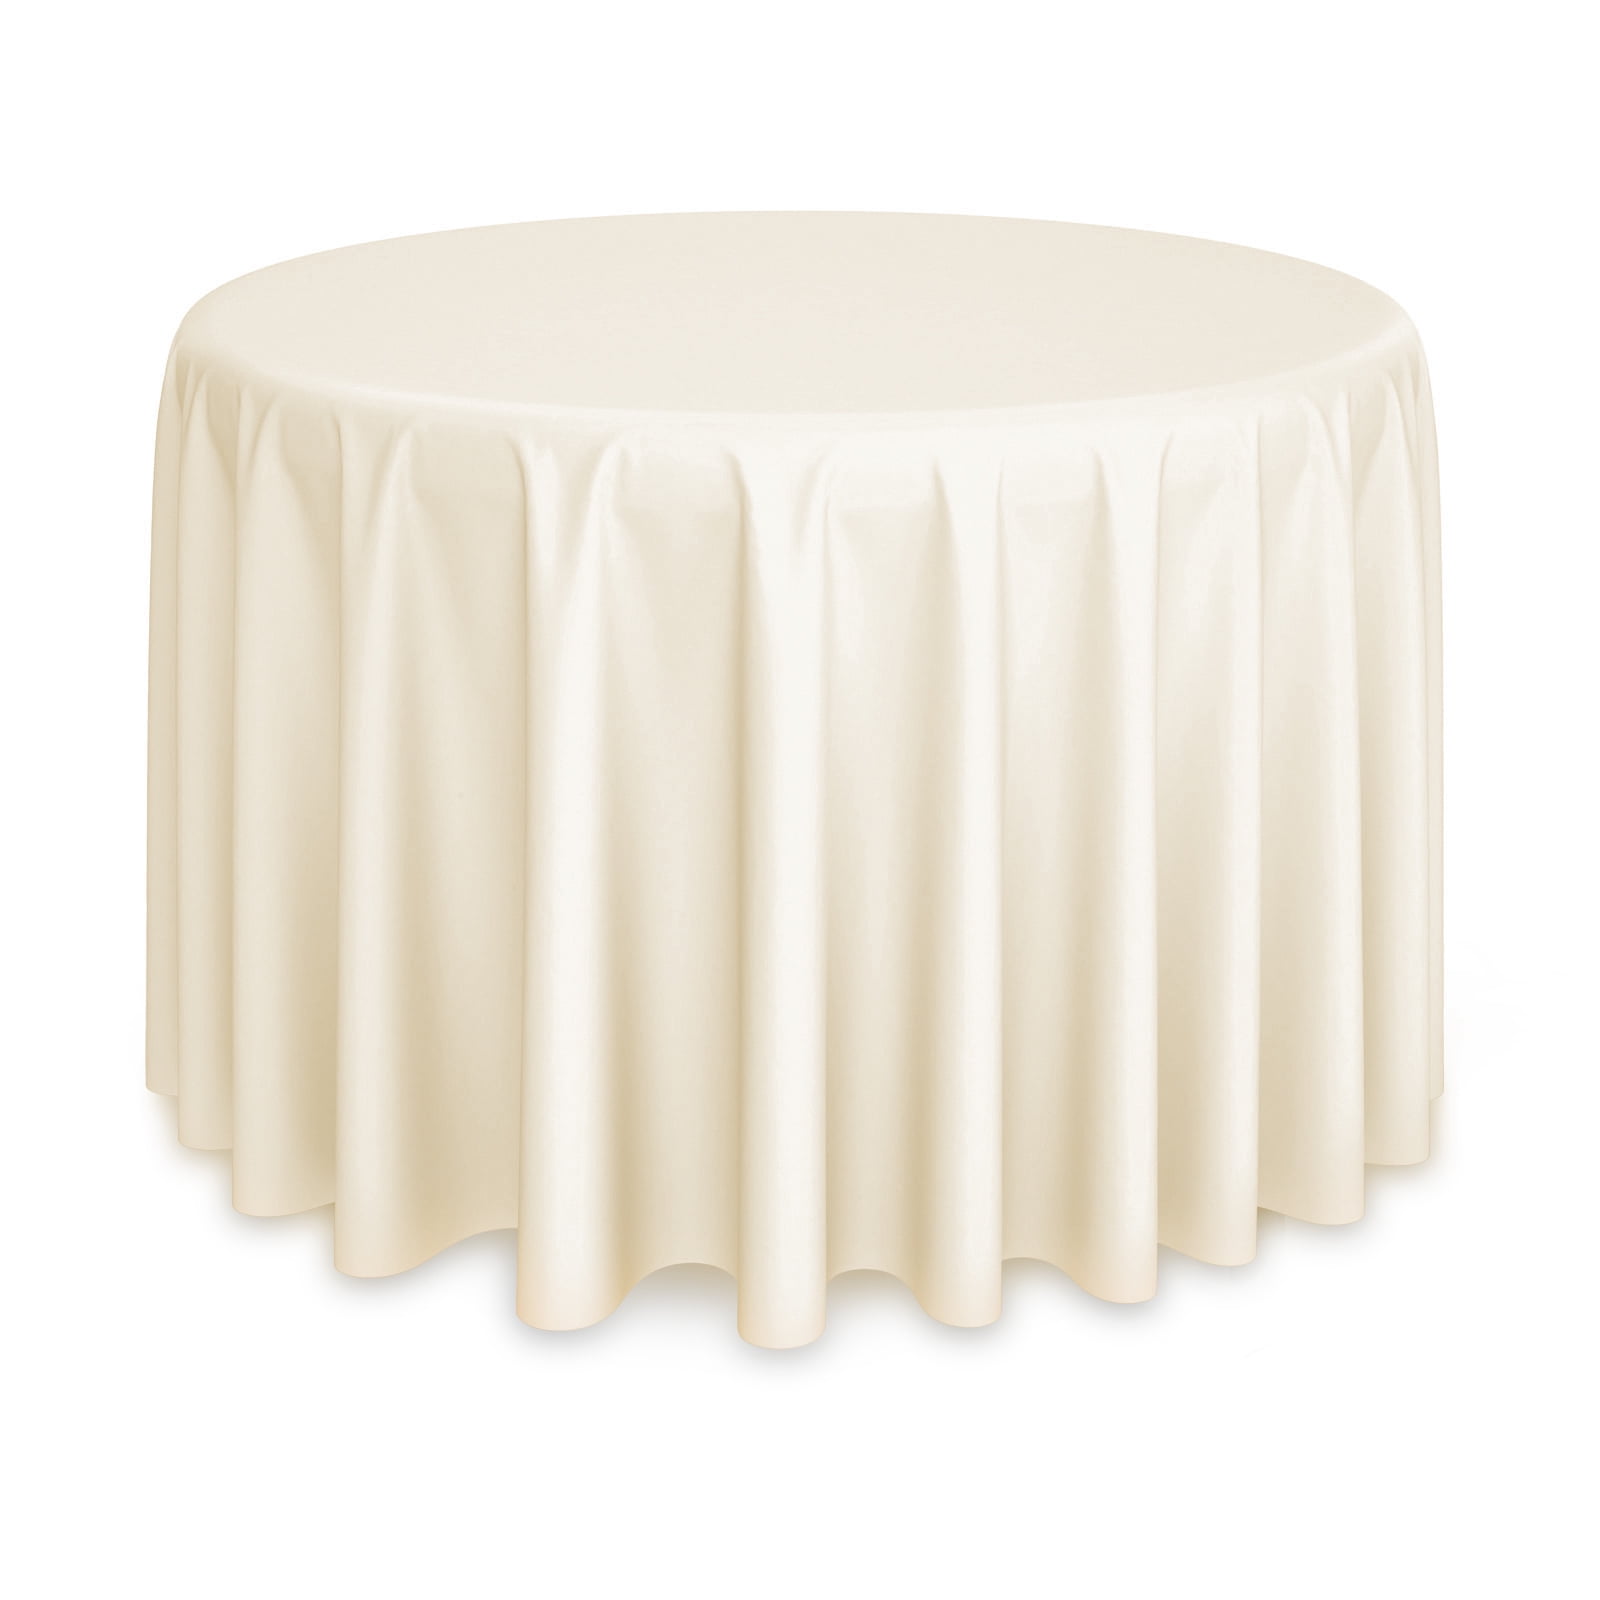 Ivory Polycotton Tablecloth Table Cover Cloth Round Rectangular Square Wedding 